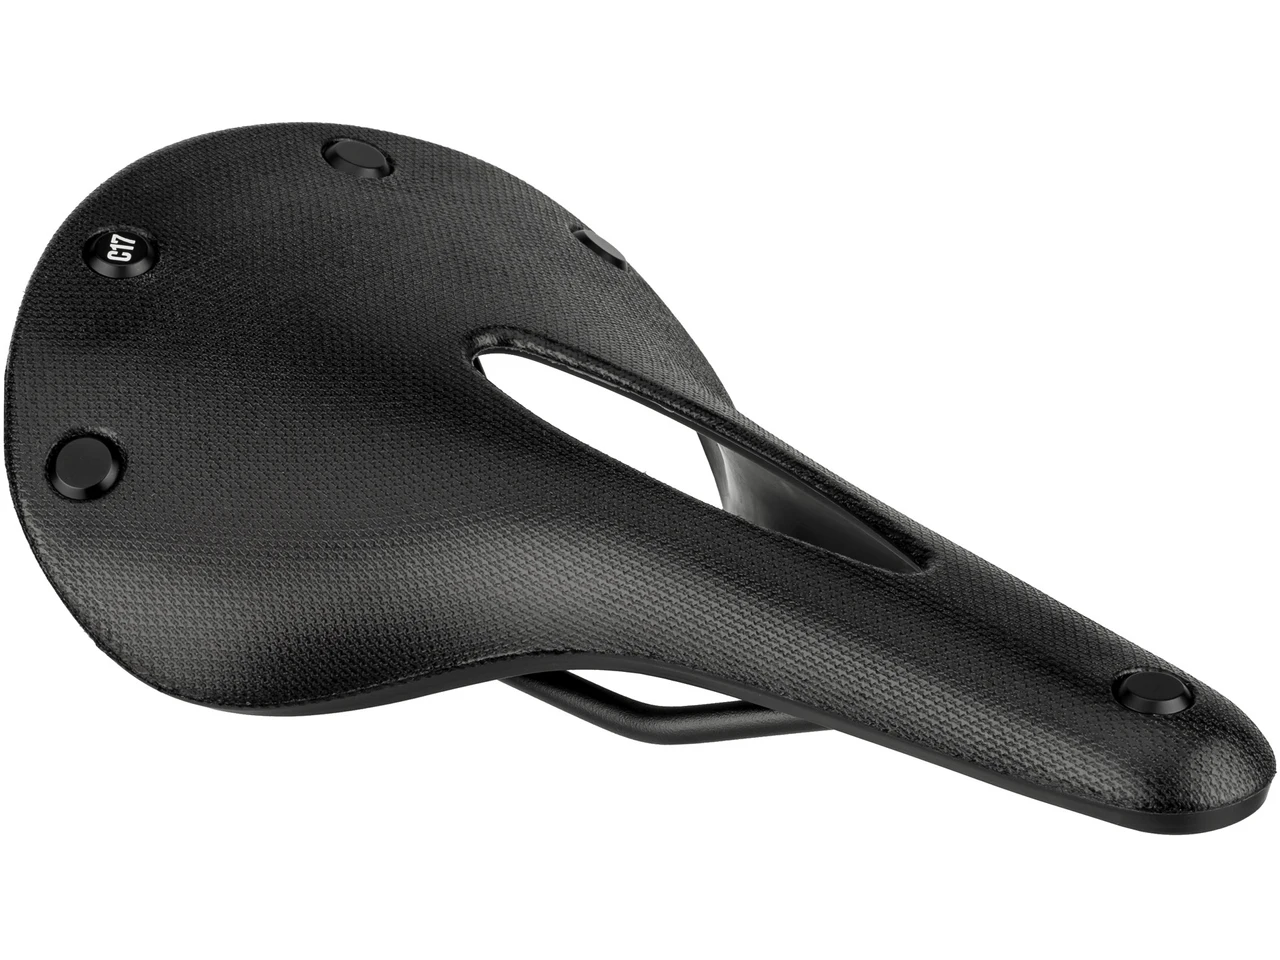 Brand New Brooks Cambium C17 Special seat saddle weather Black Natural rubber